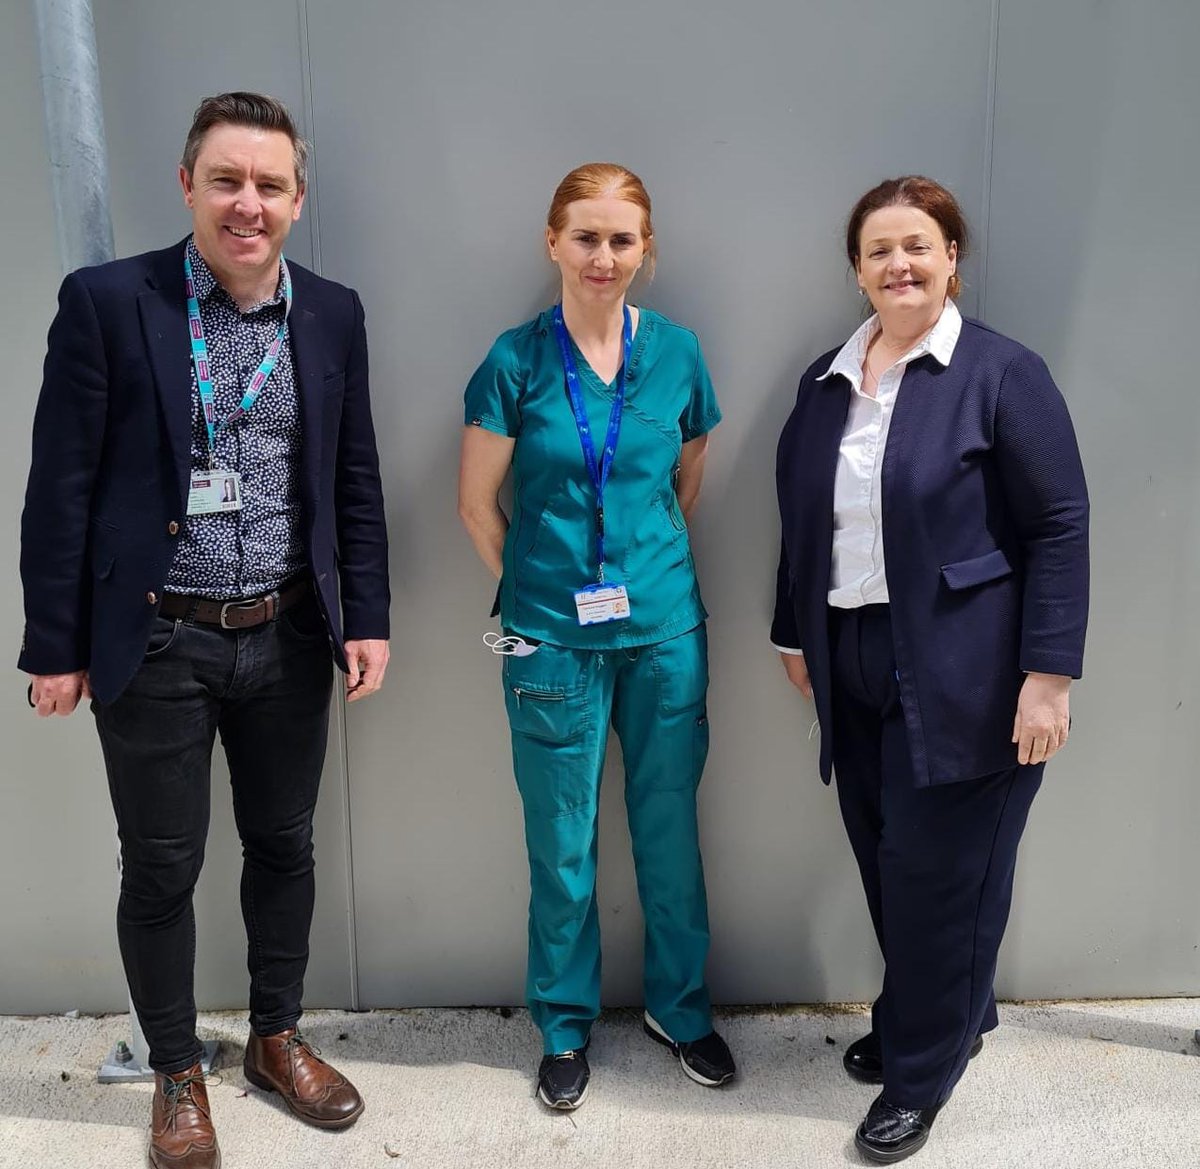 Great to have 1st in person meeting with my supervisor @pcarriv and DON @PortiunculaHosp @MaryMahon2021. Exciting meet discussing plans for PhD and RCT in venous health & preservation. @CancerNUIGalway @n_gnursing @CDONMSaolta @AVATAR_grp @gallagher_olive